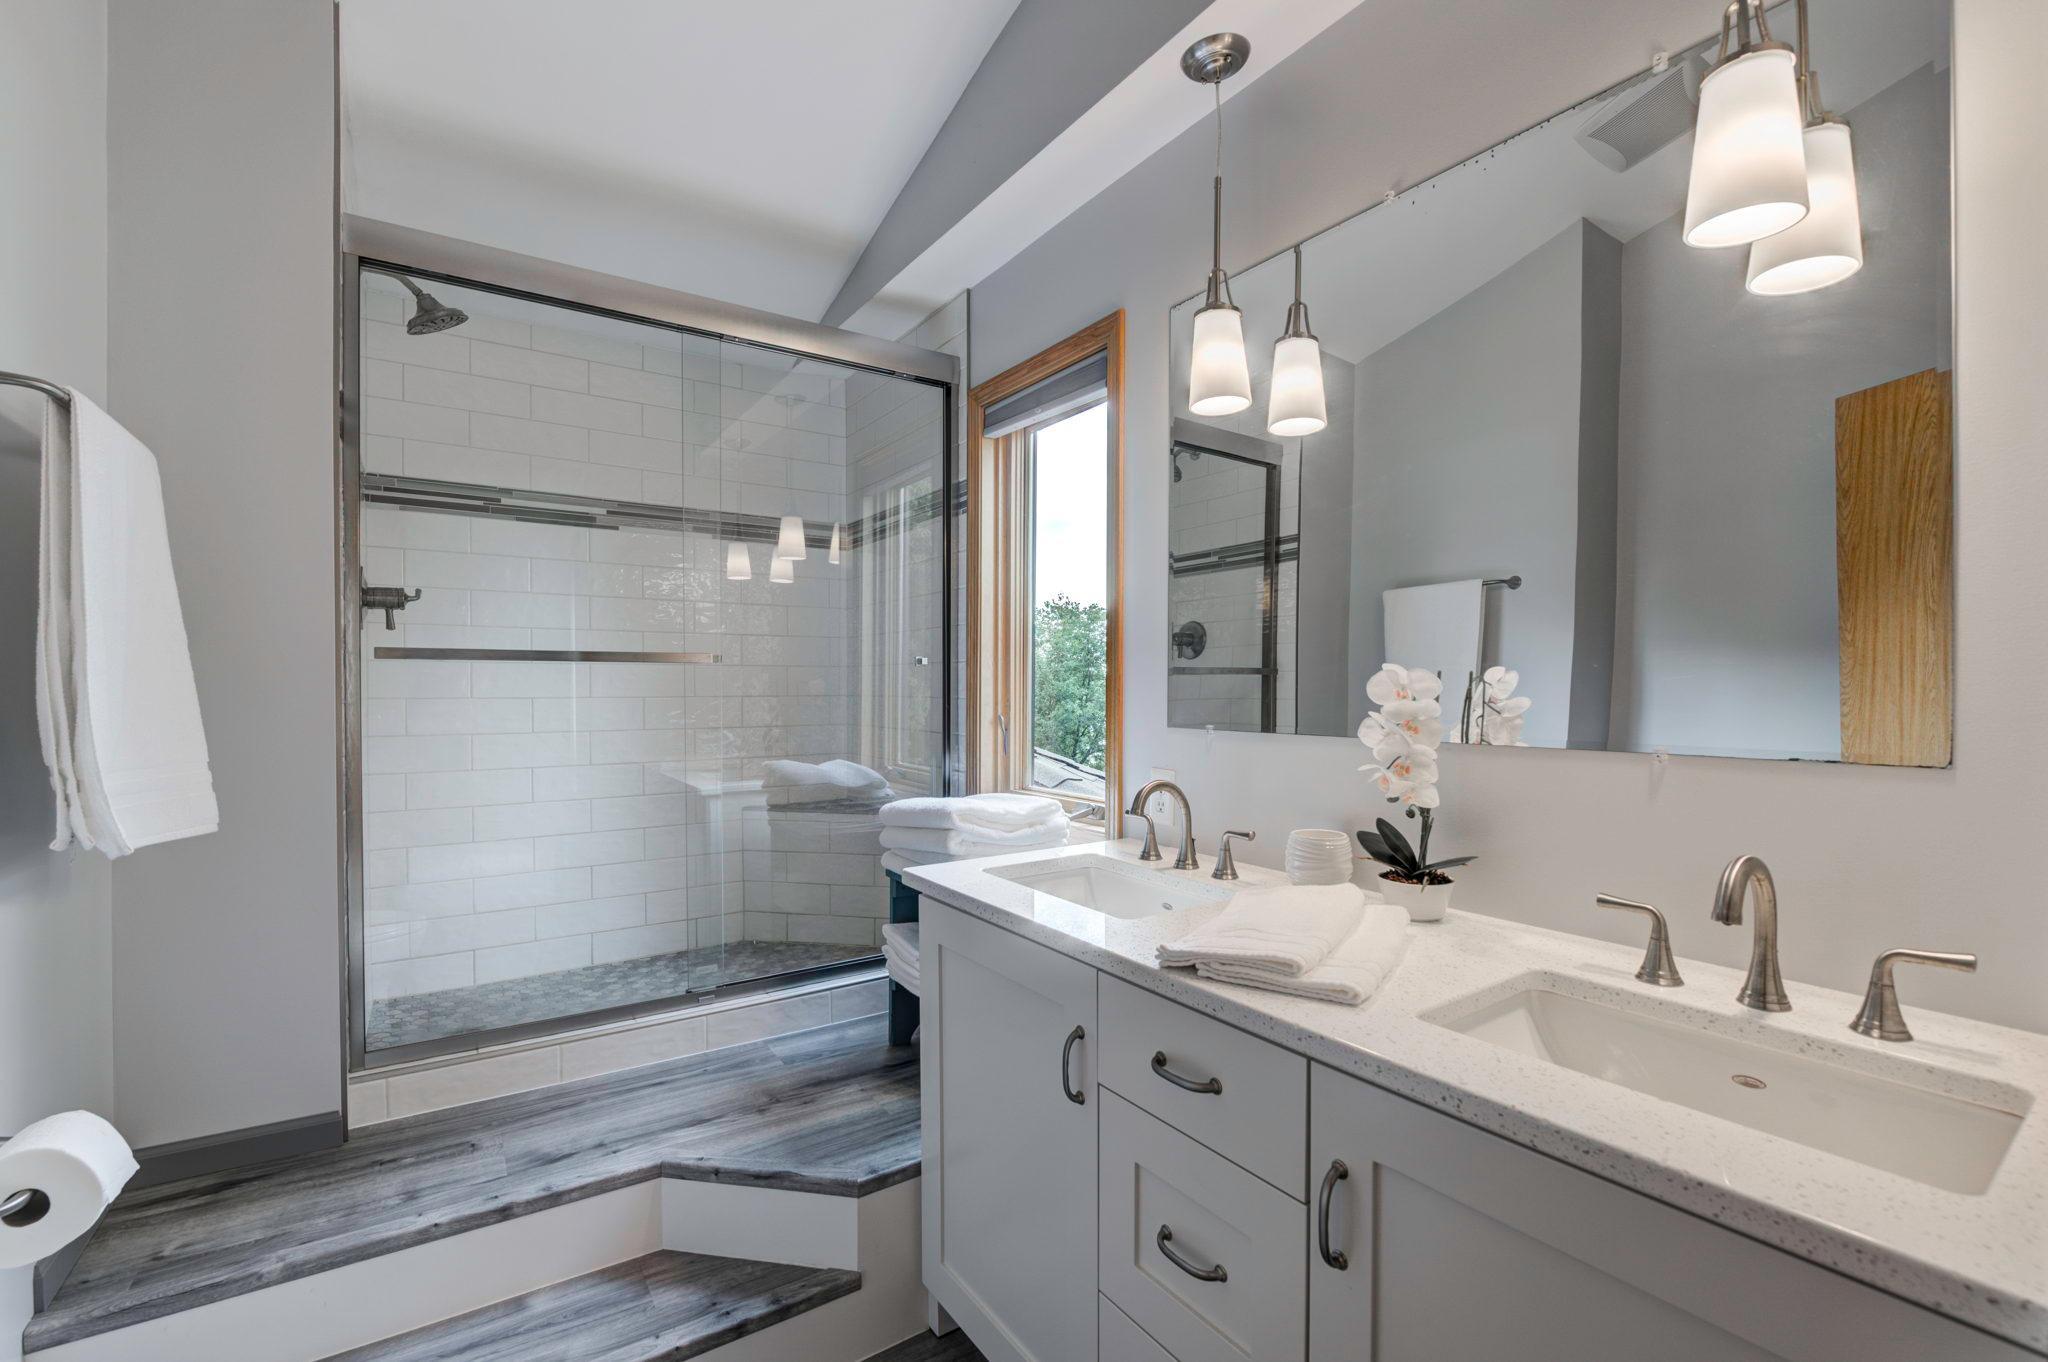 The private master bath was updated in 2022 and features a dual sink vanity with plenty of storage and a walk-in tile shower